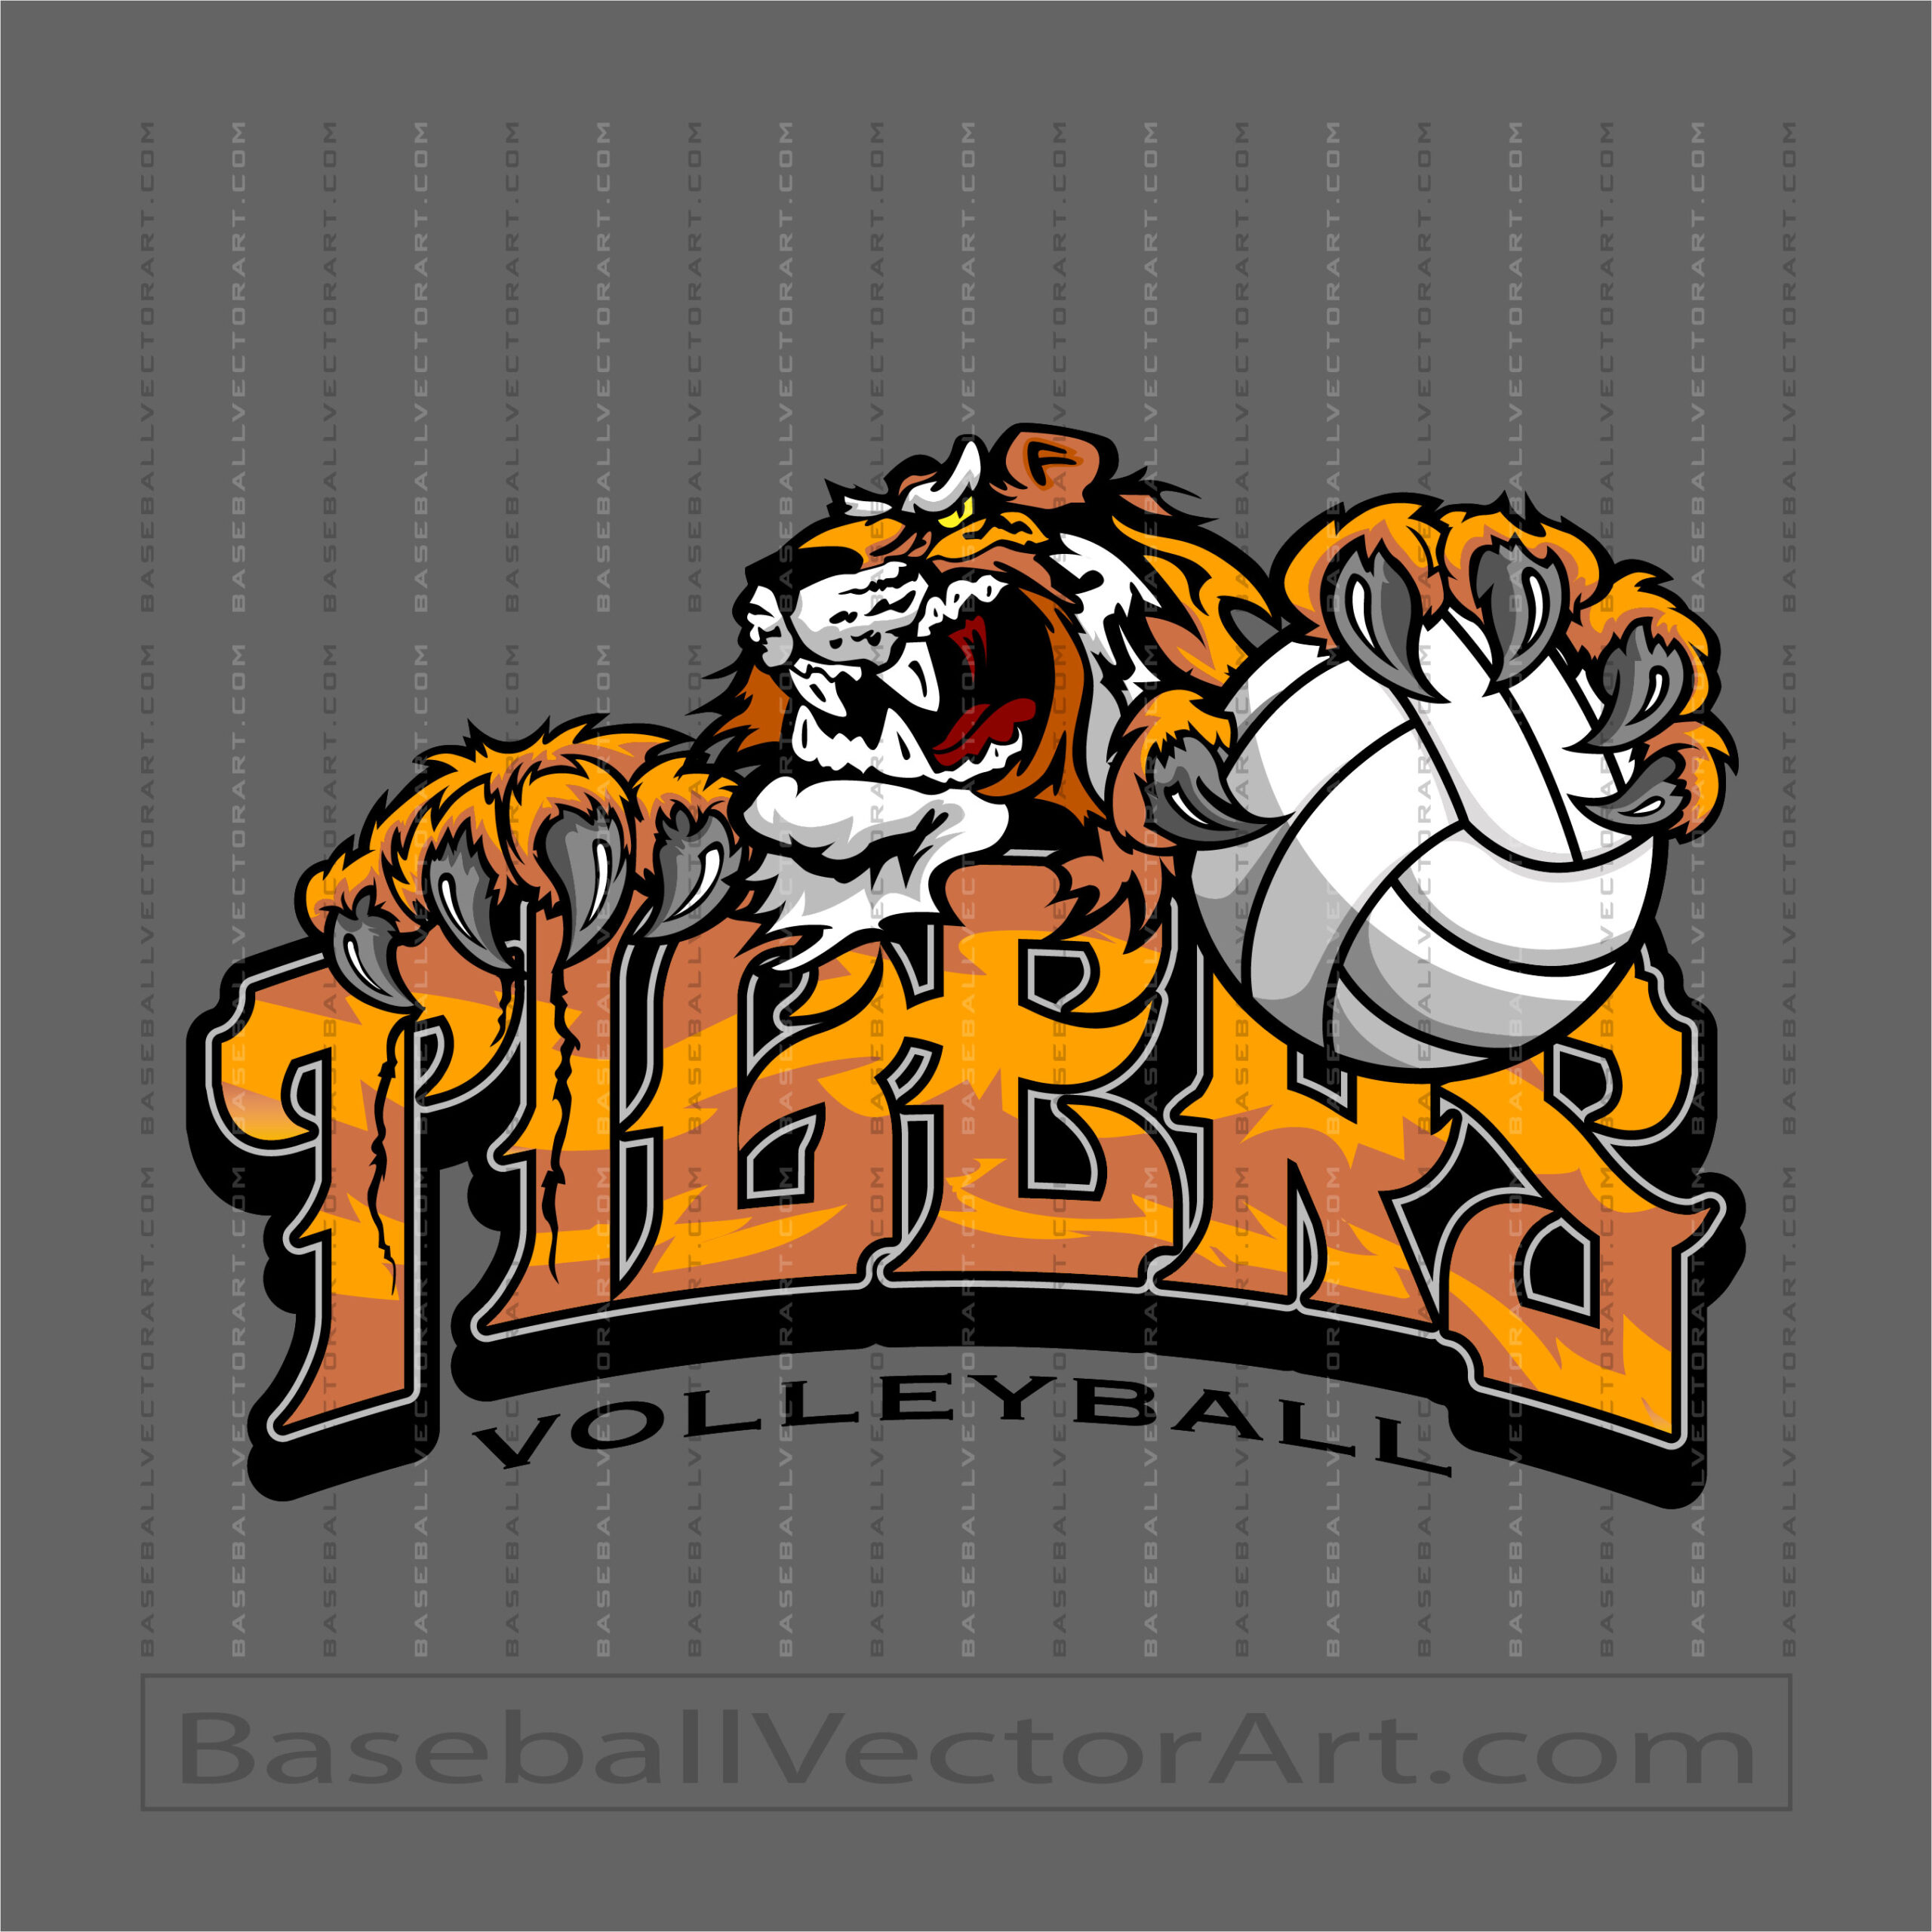 Volleyball Tigers Art